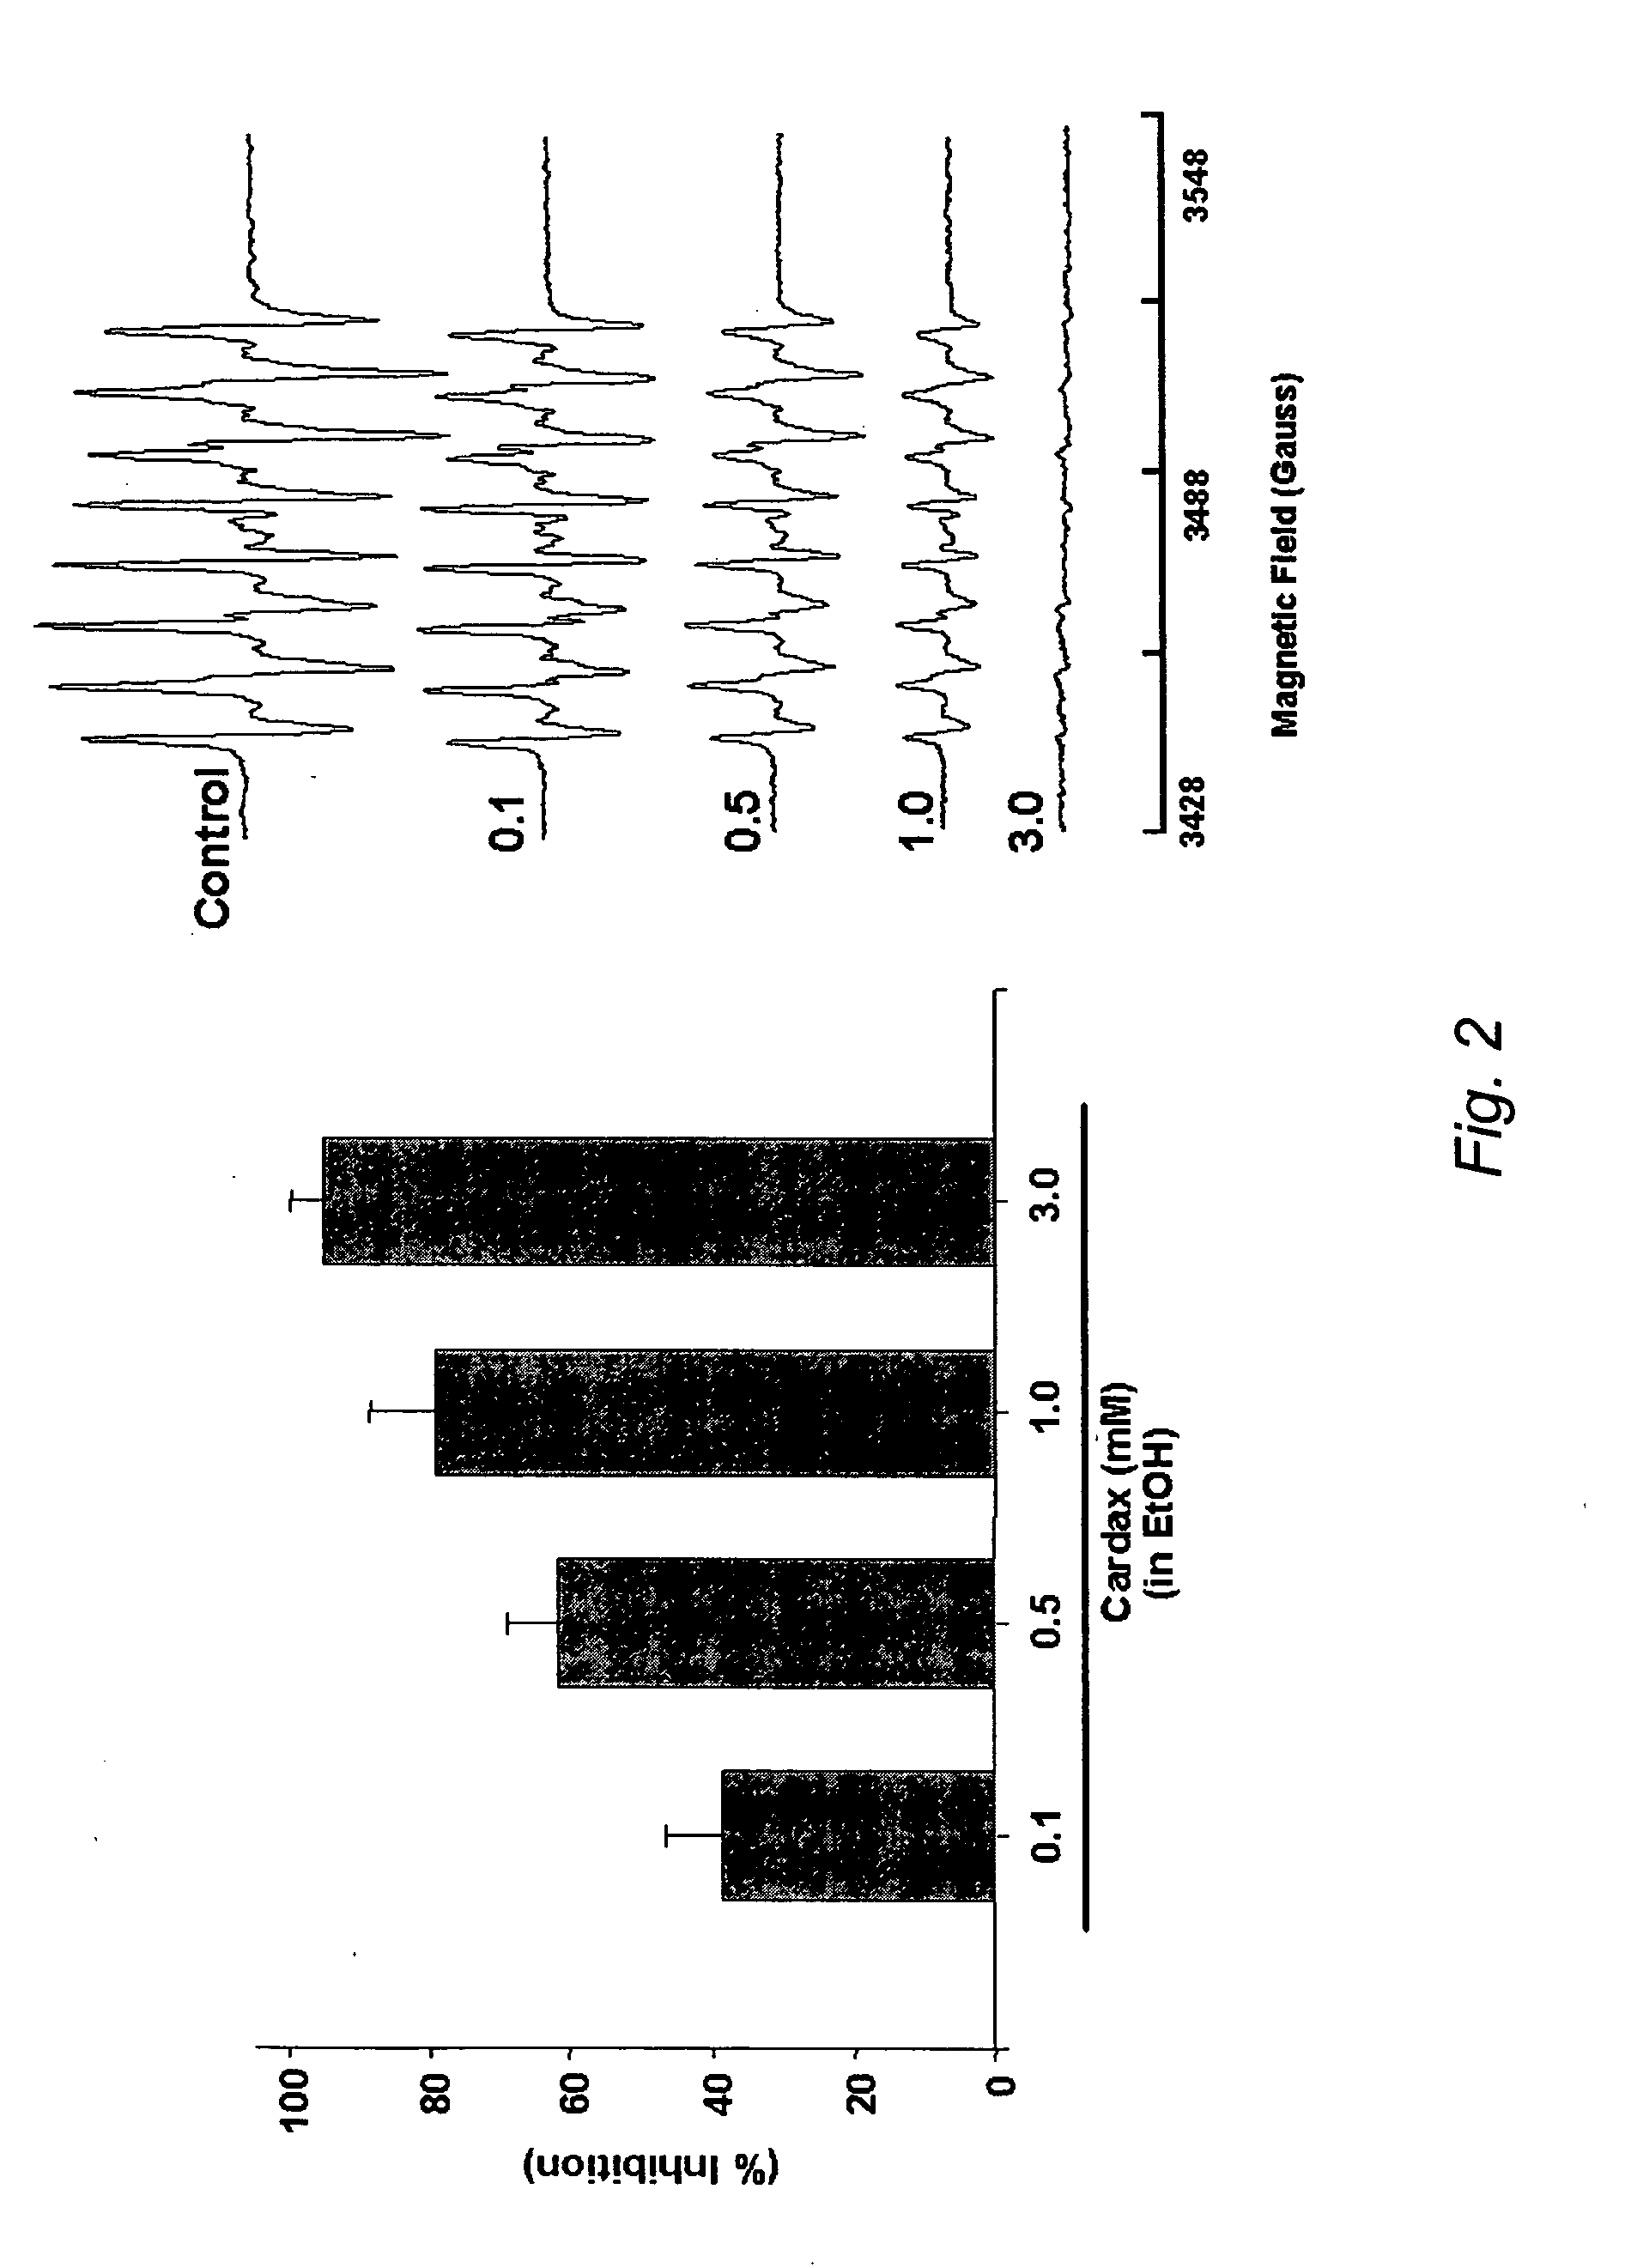 Carotenoid analogs or derivatives for the inhibition and amelioration of liver disease